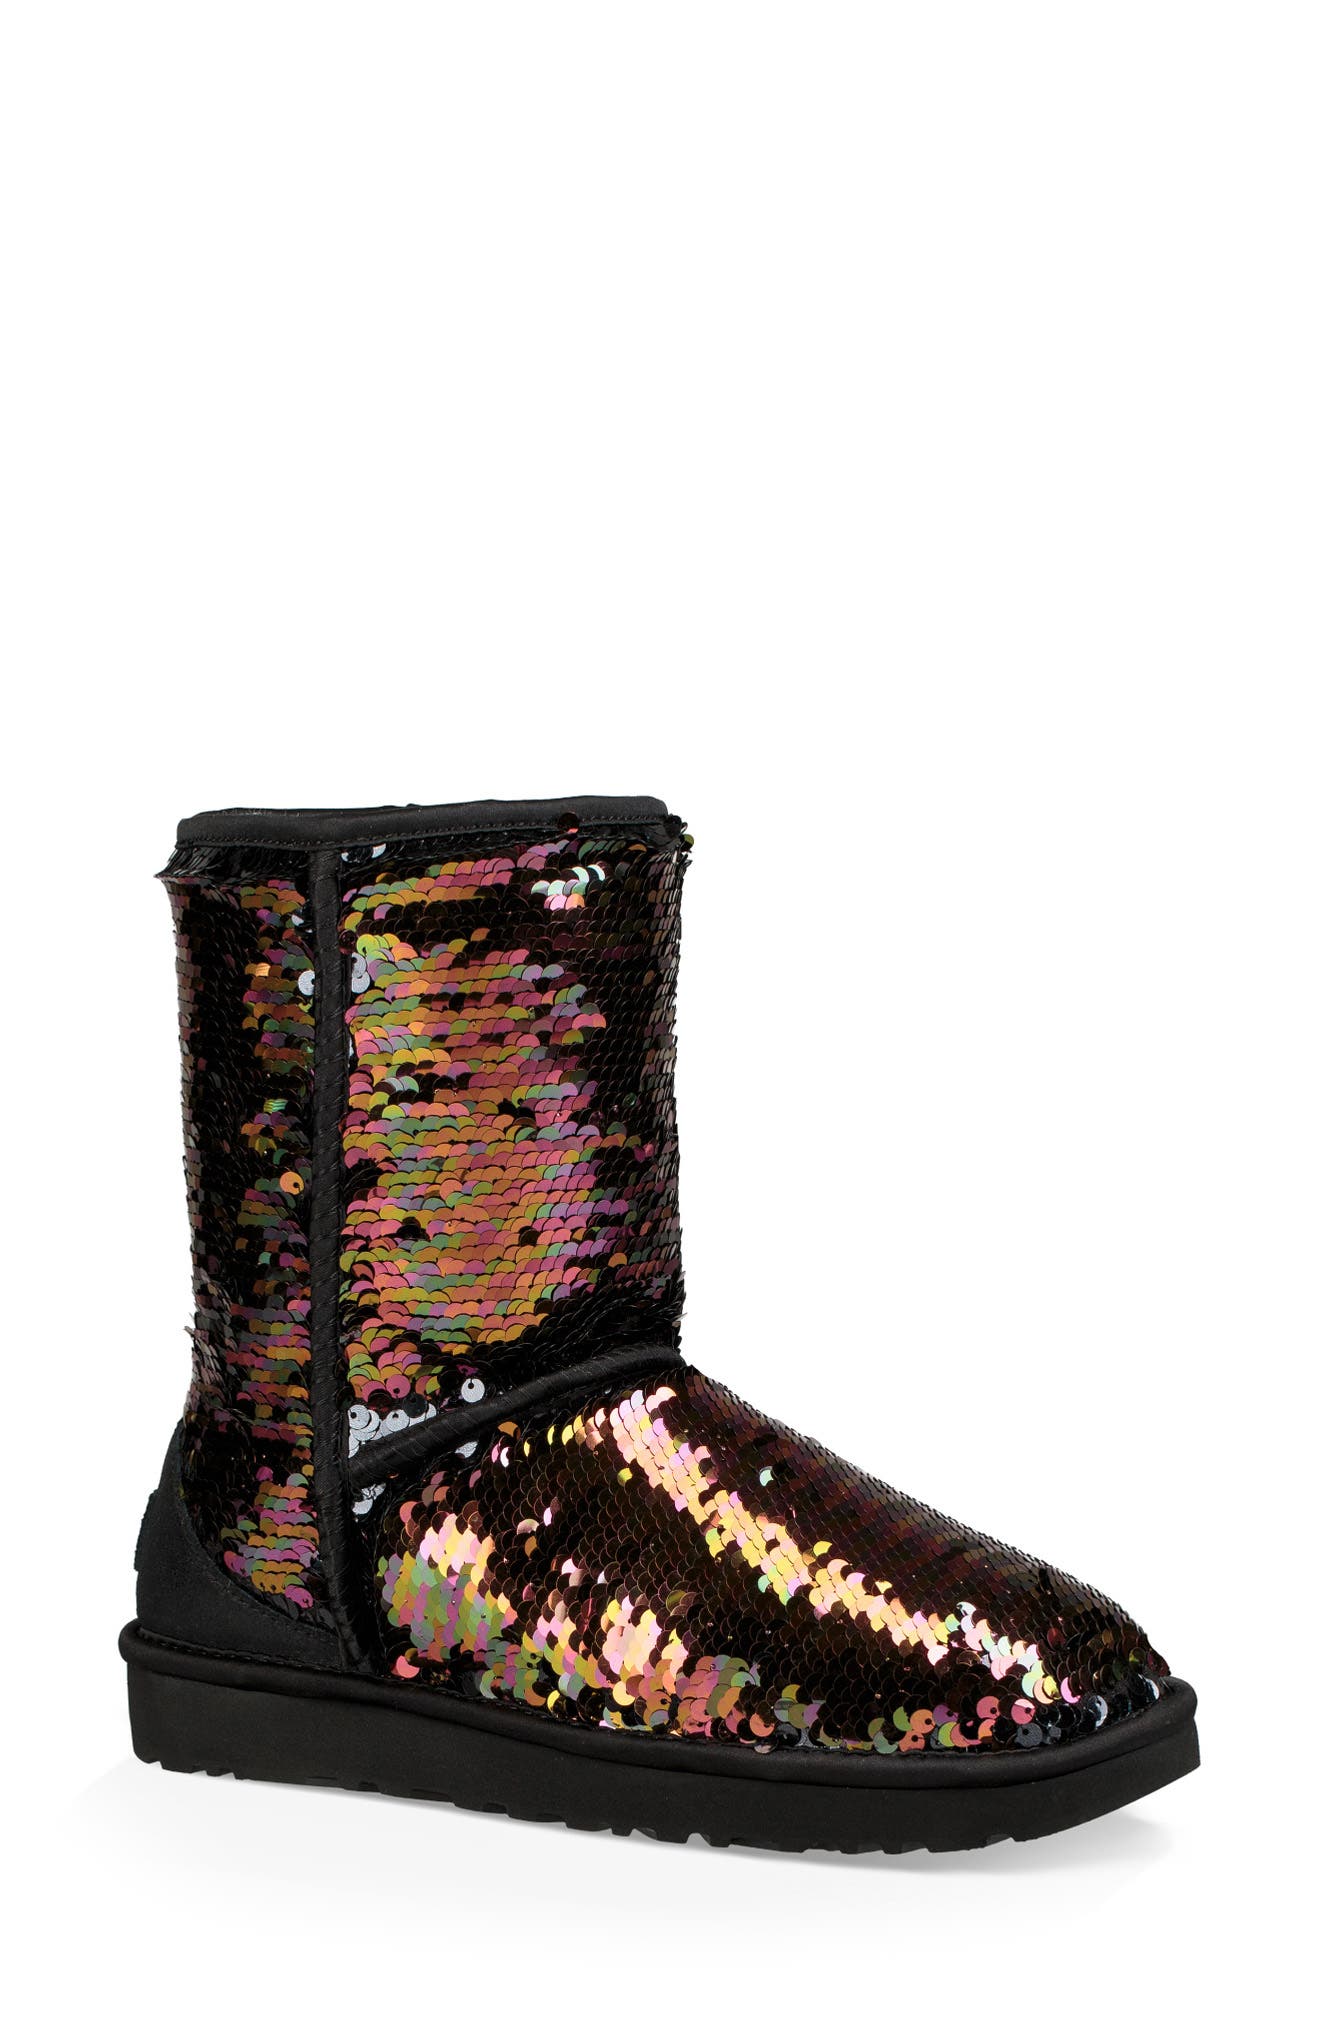 sequin uggs size 10